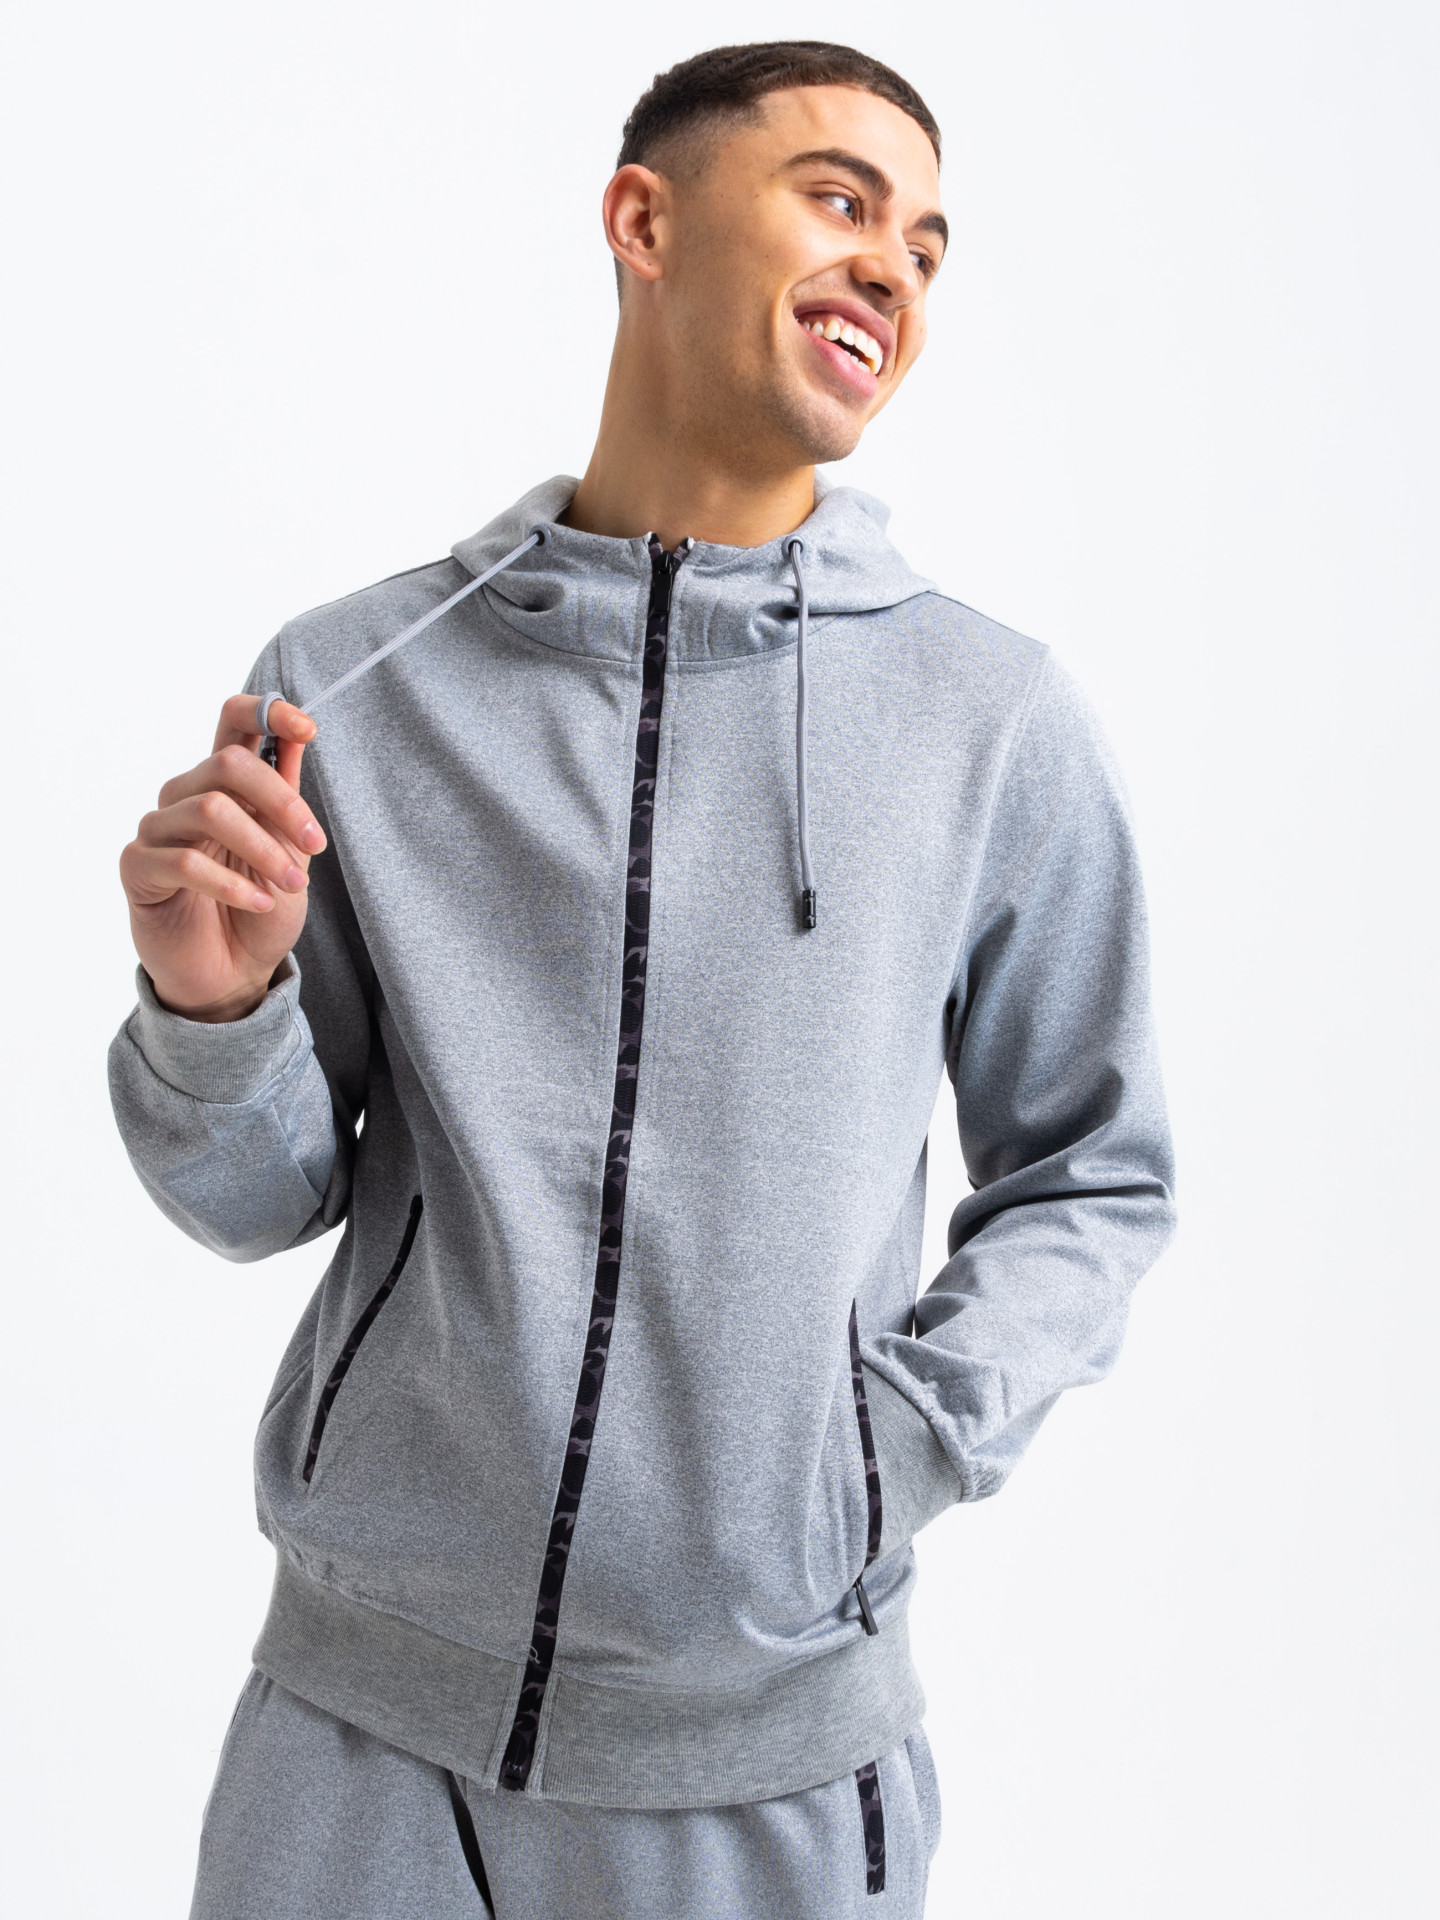 Army Zip Poly Tracksuit in Grey | Men's Clothing & Fashion | HisColumn